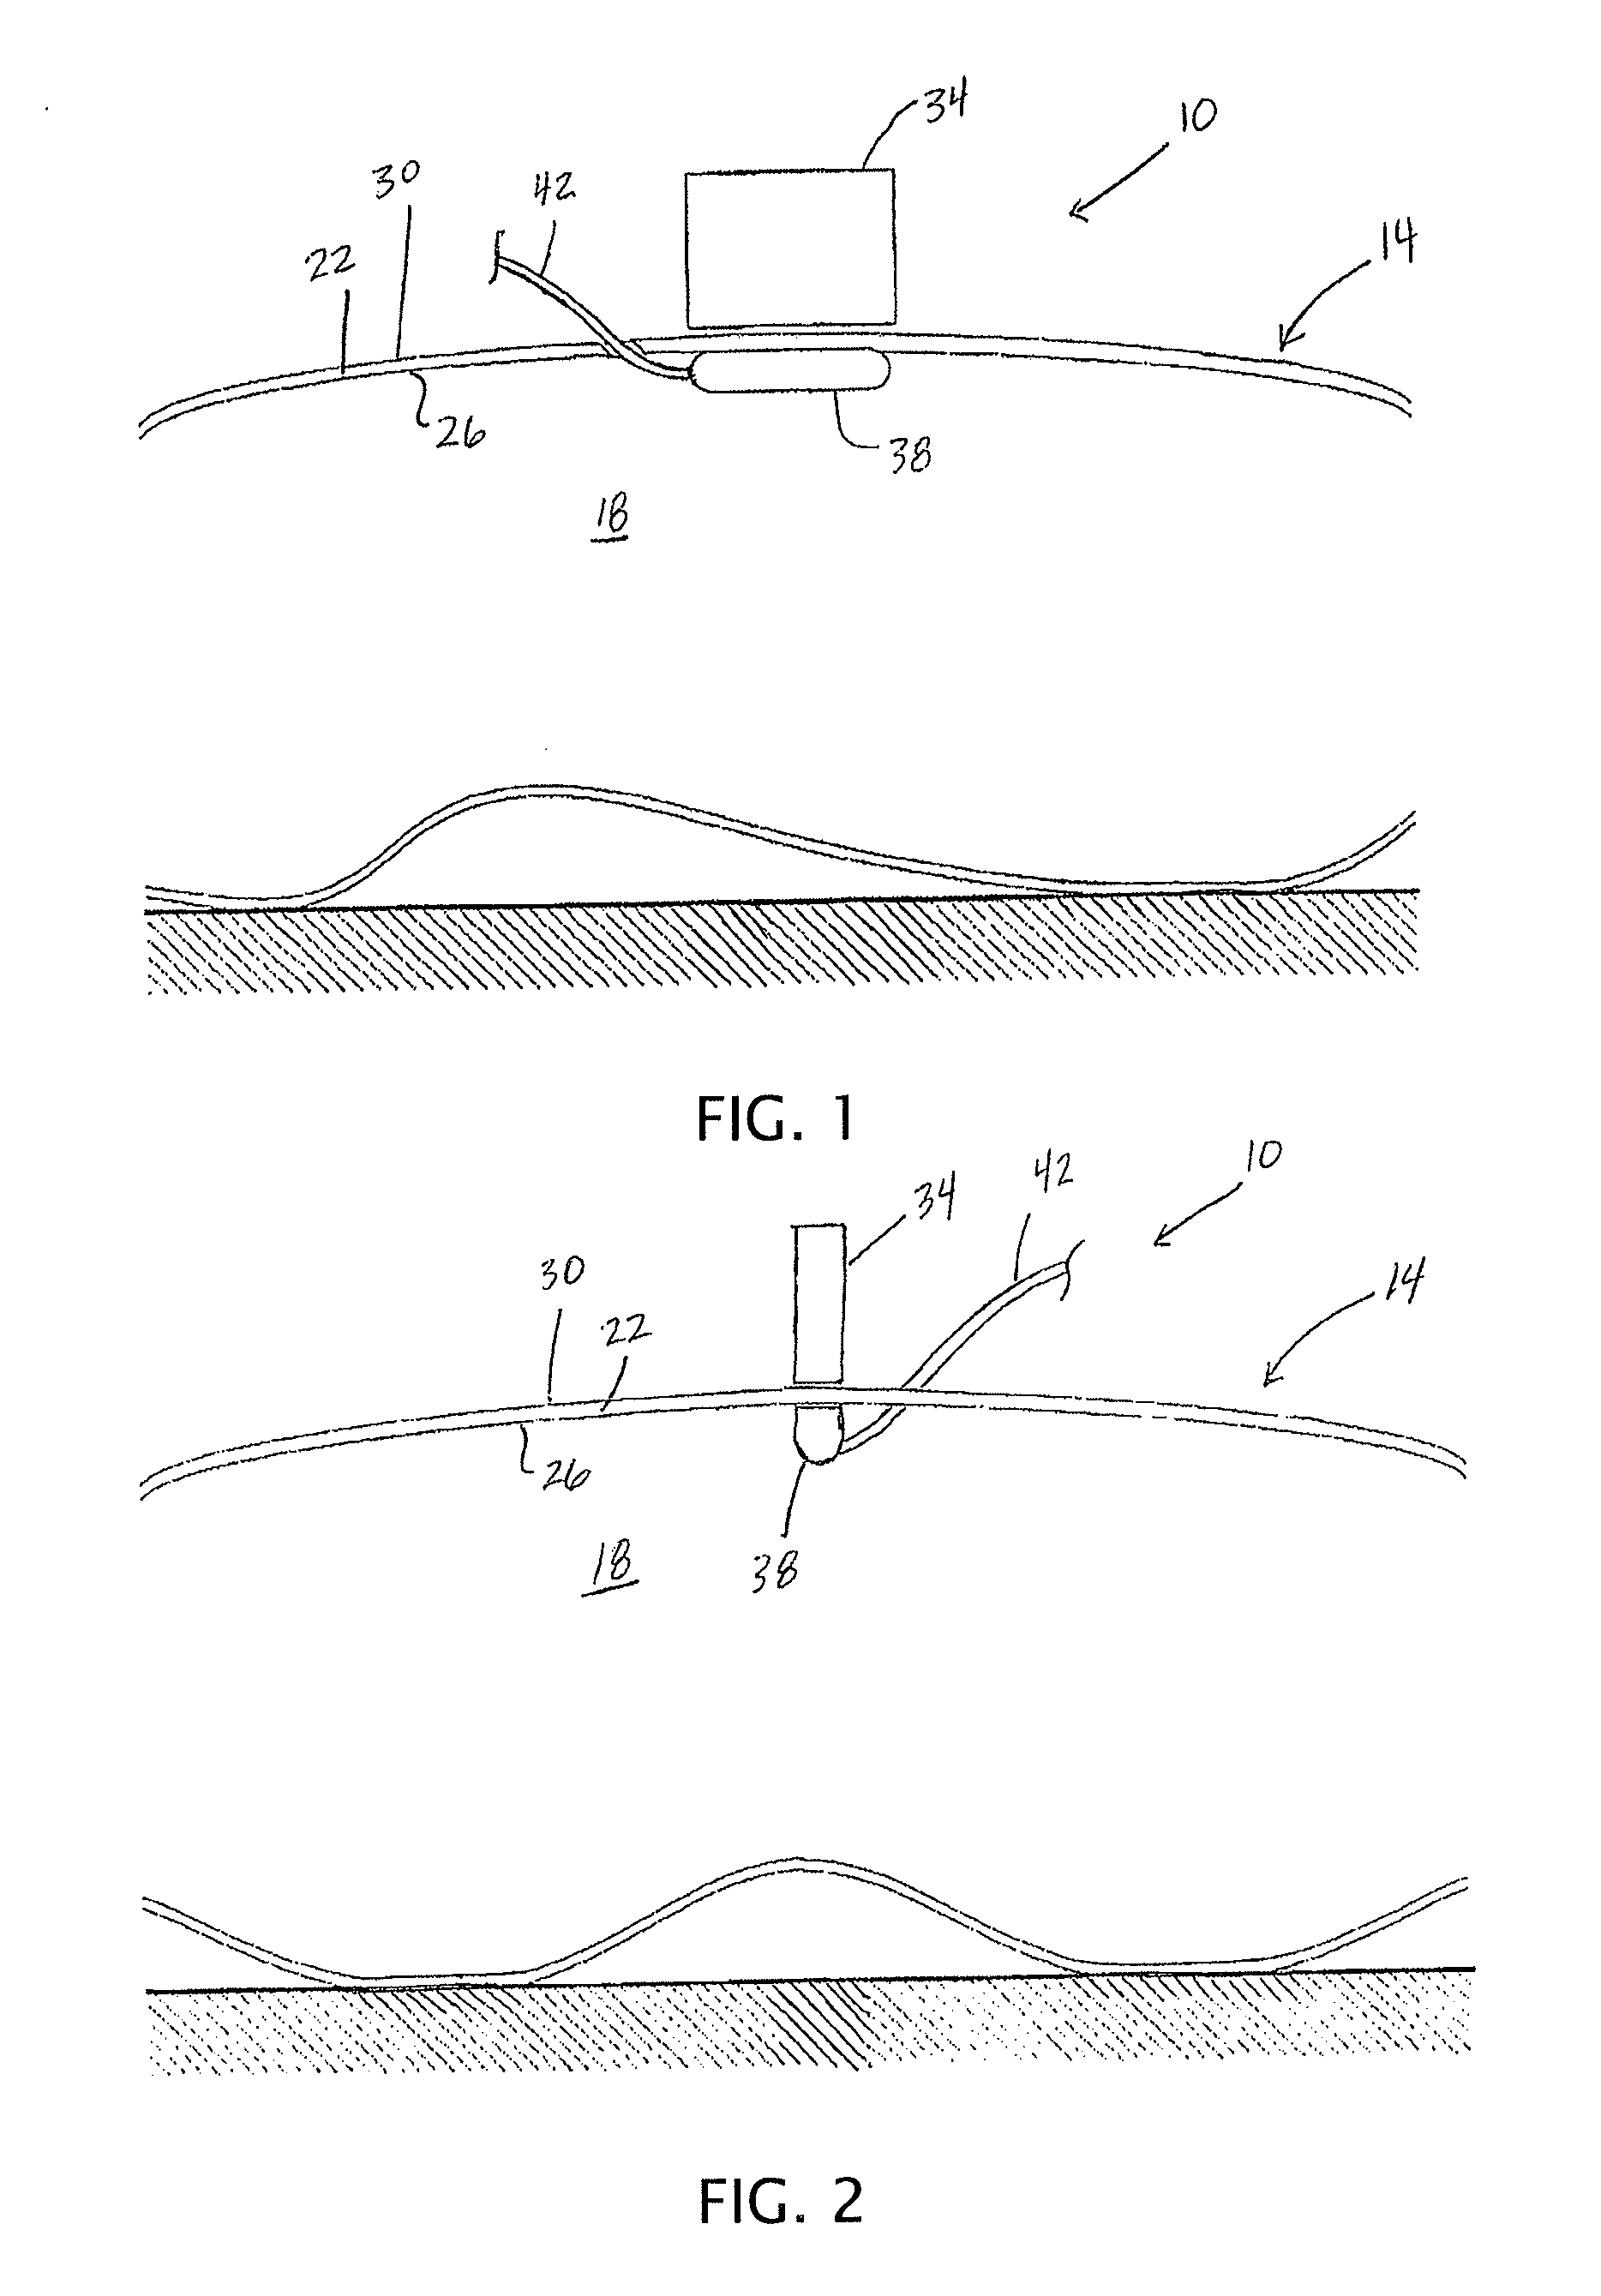 Apparatuses, systems, and methods for use and transport of magnetic medical devices with transport fixtures or safety cages